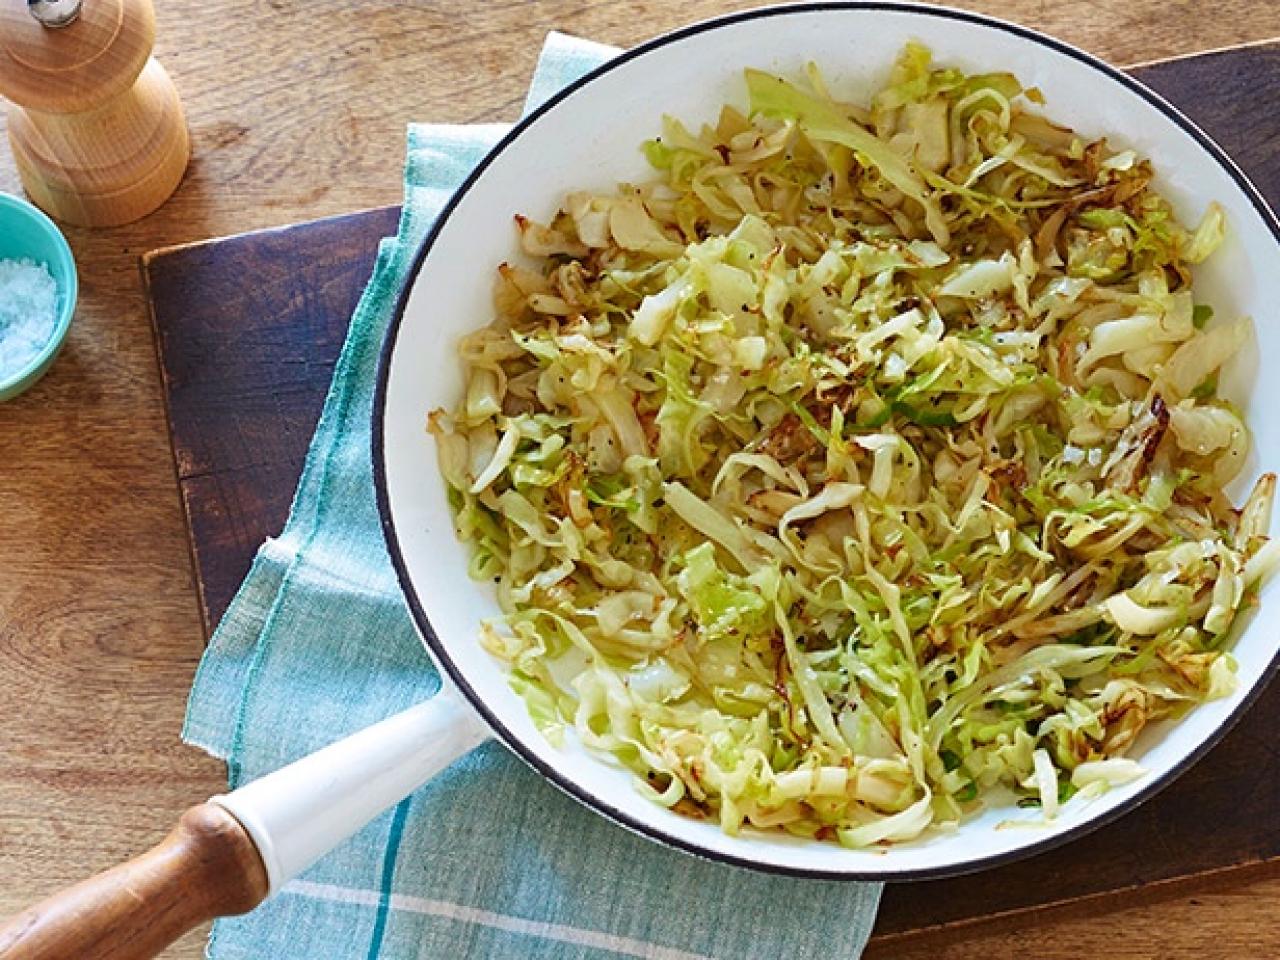 Get your greens in! Try out this cabbage recipe